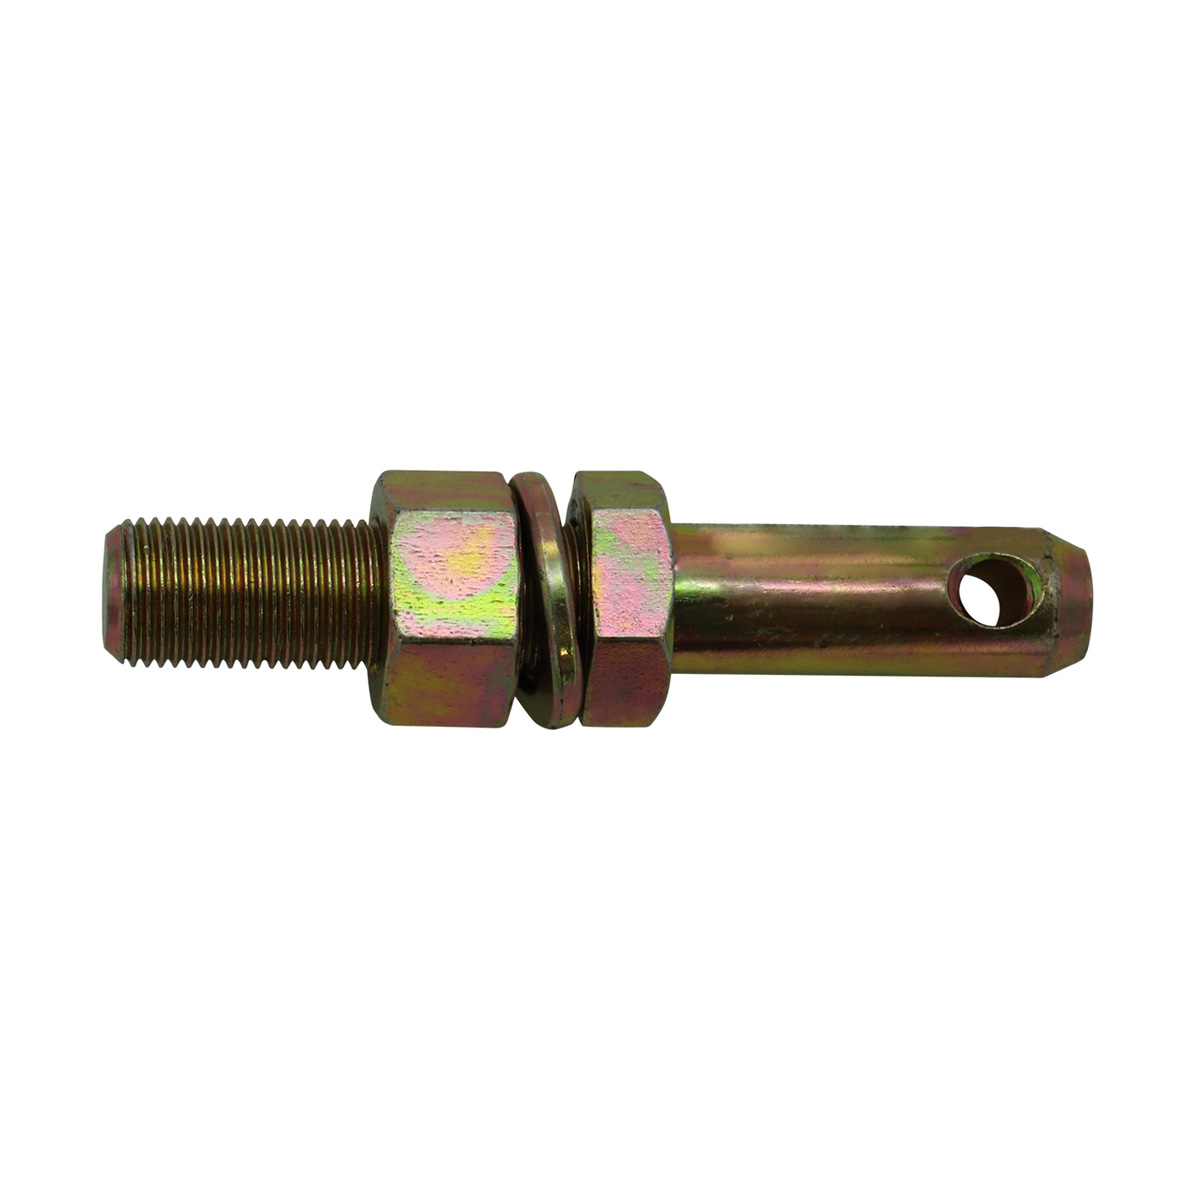 Adjustable Category 0 Forged Lift Arm Pin